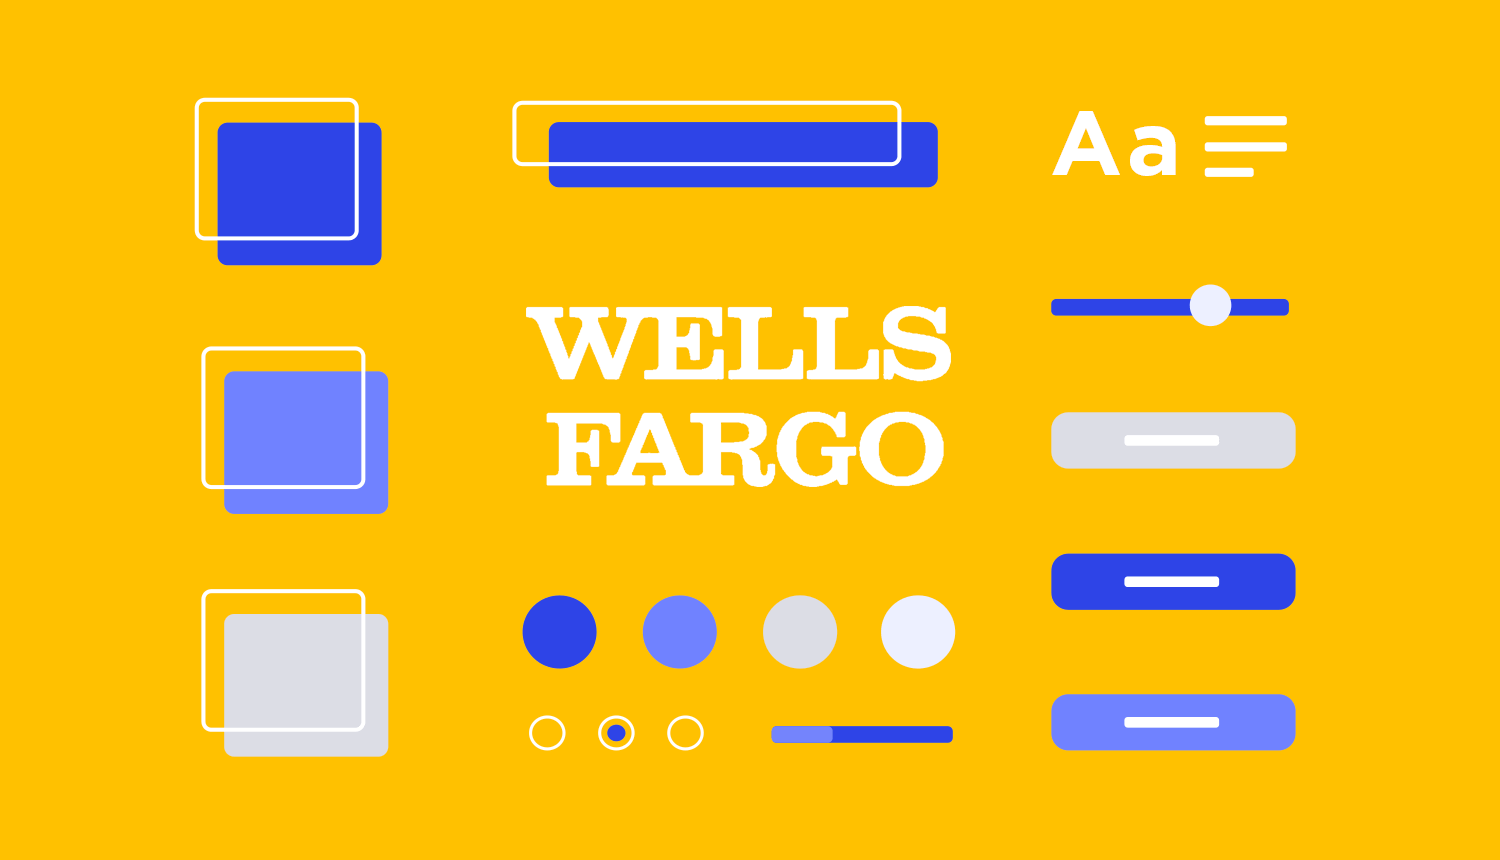 presentation by wells fargo on their design system and ux design